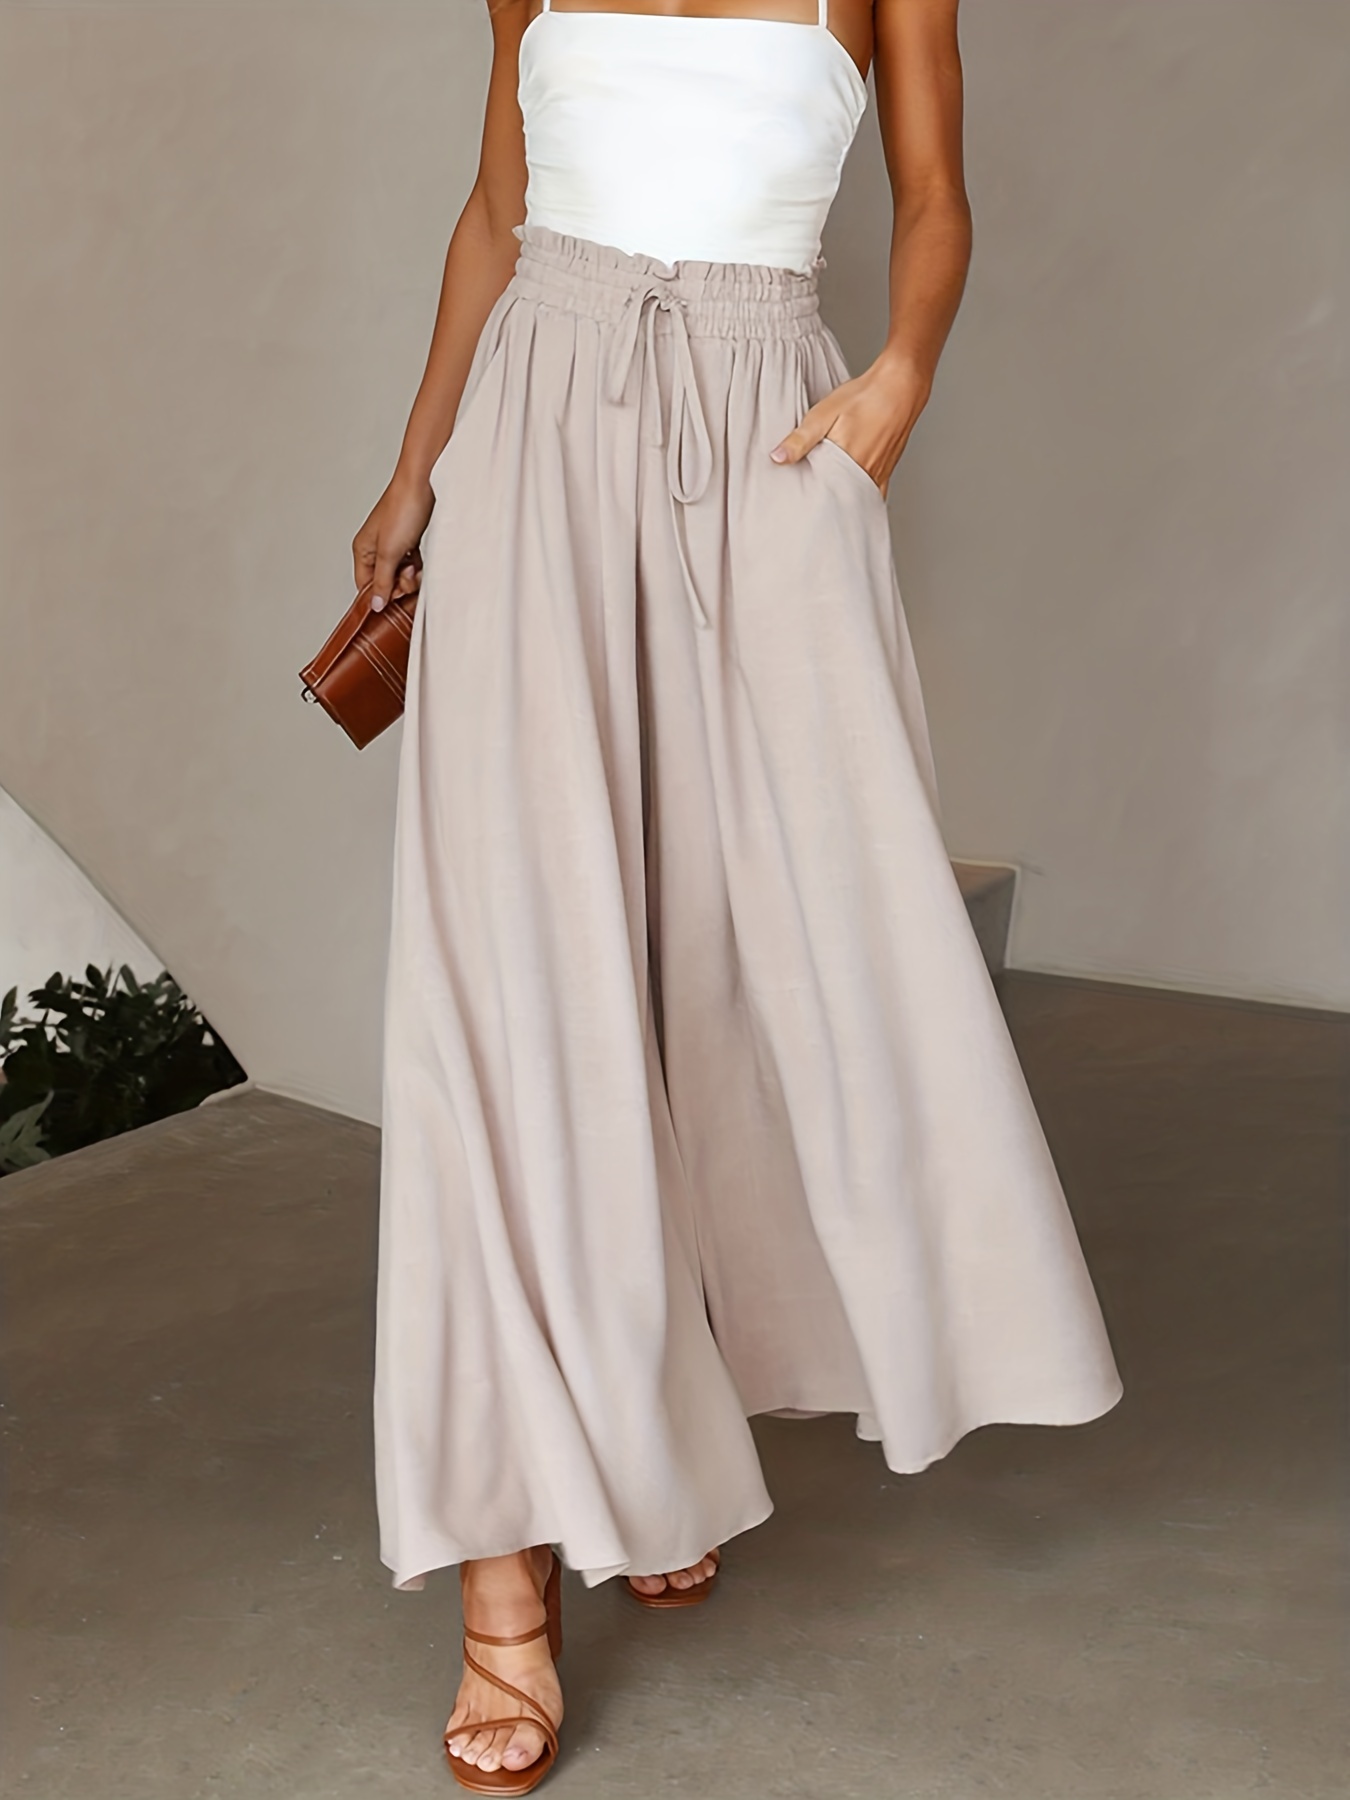 Palazzo pants and a flowy white shirt.